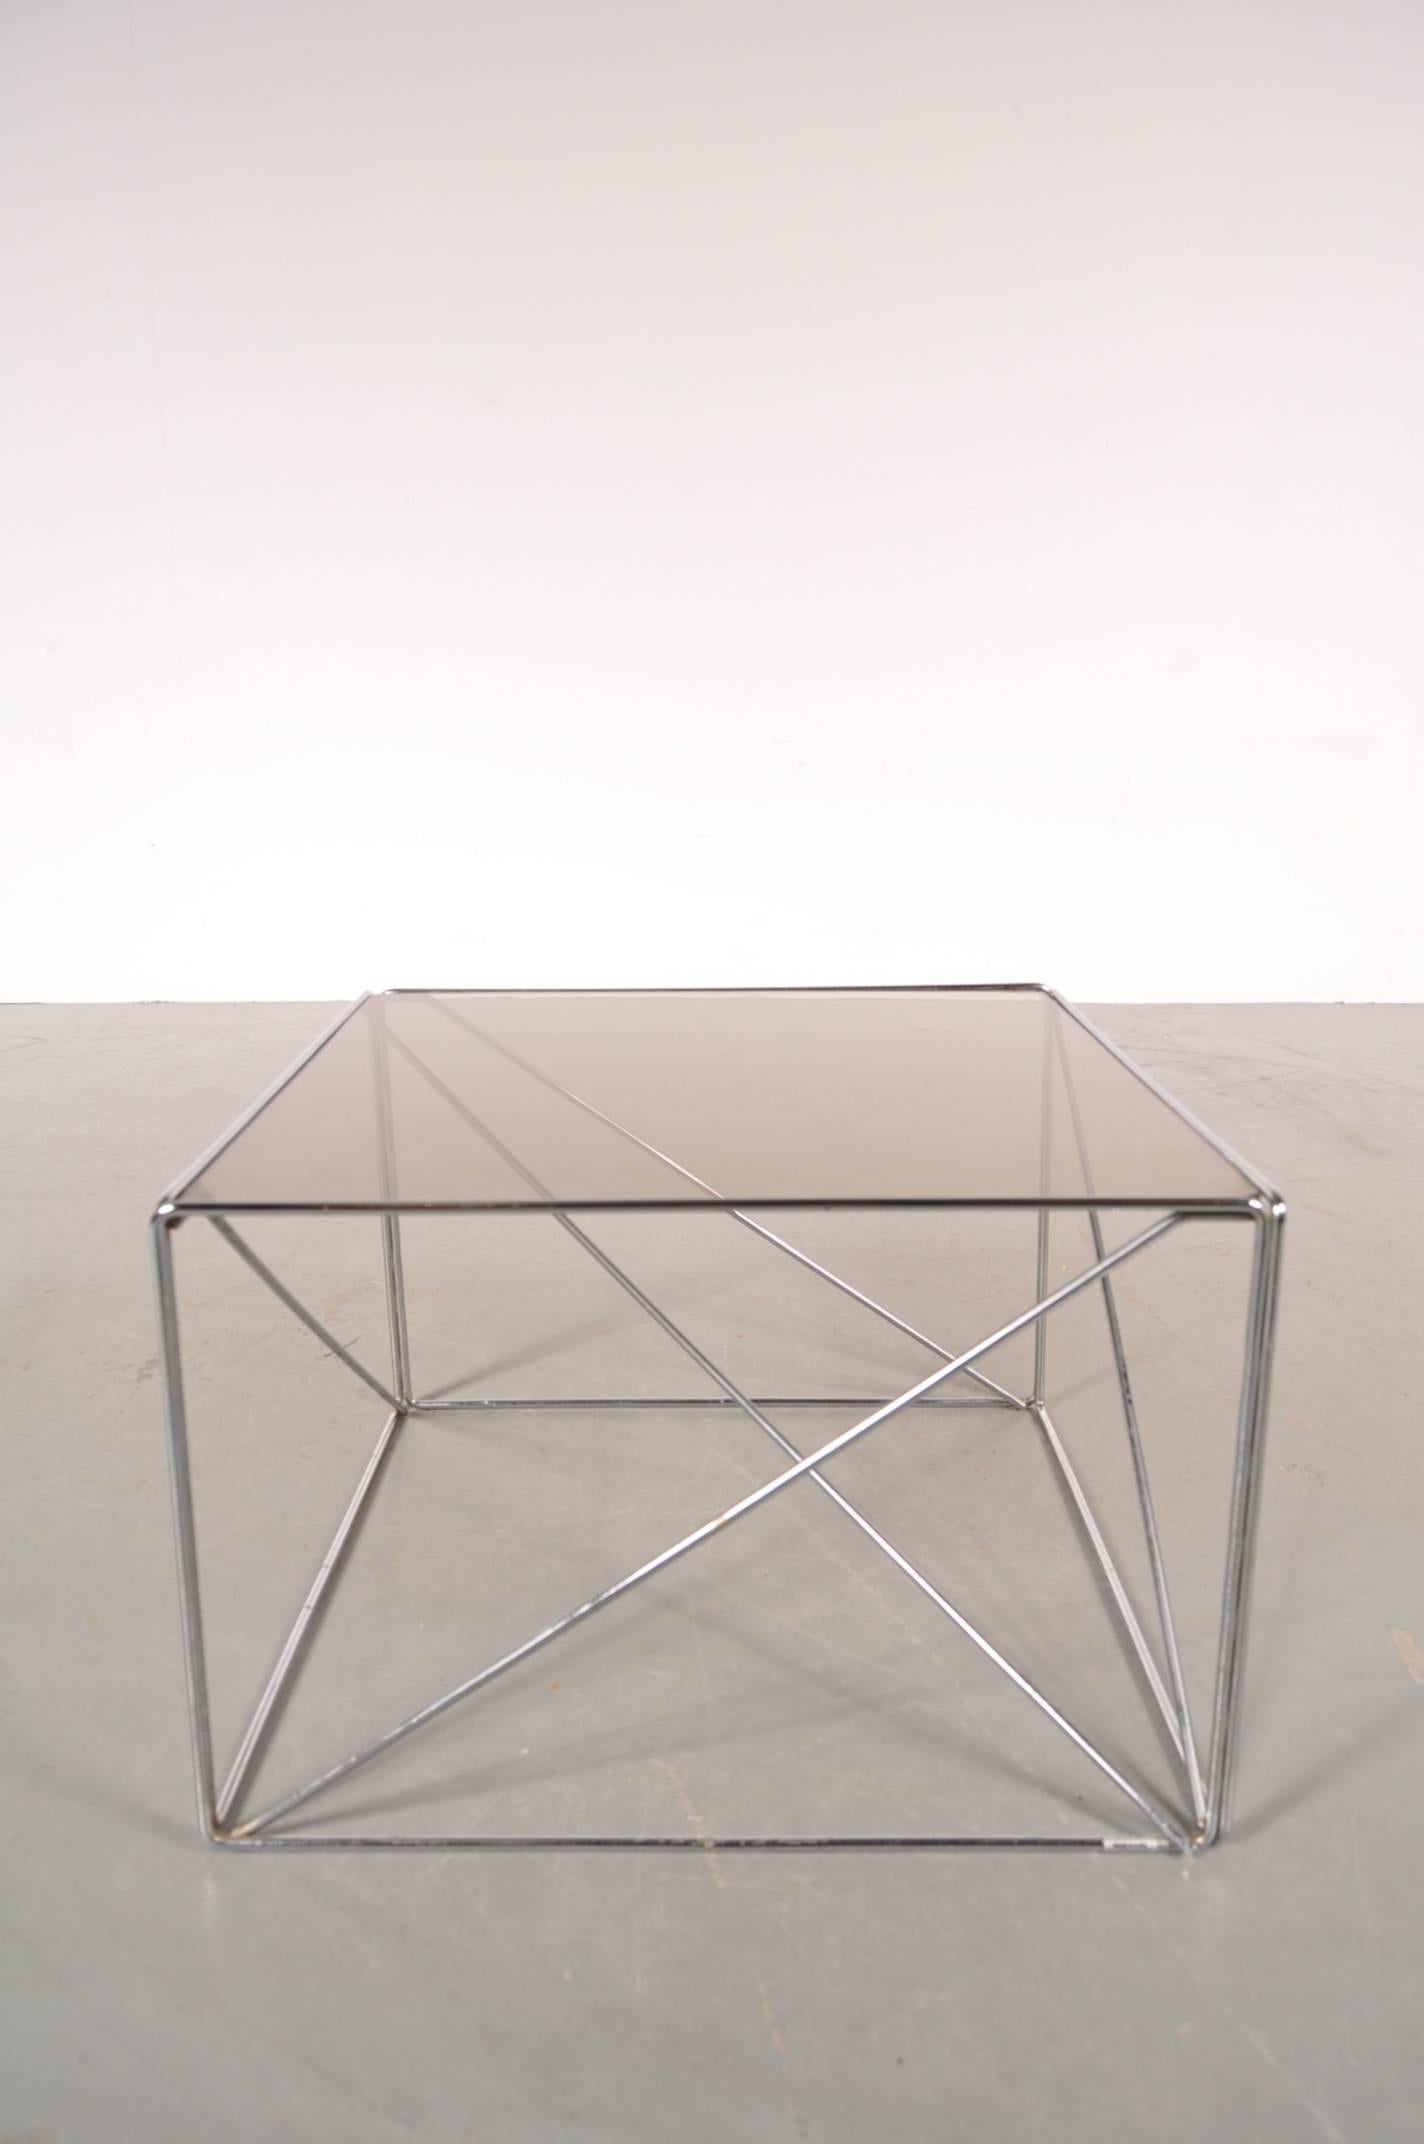 Stunning side/coffee table designed by Max Sauze for his 